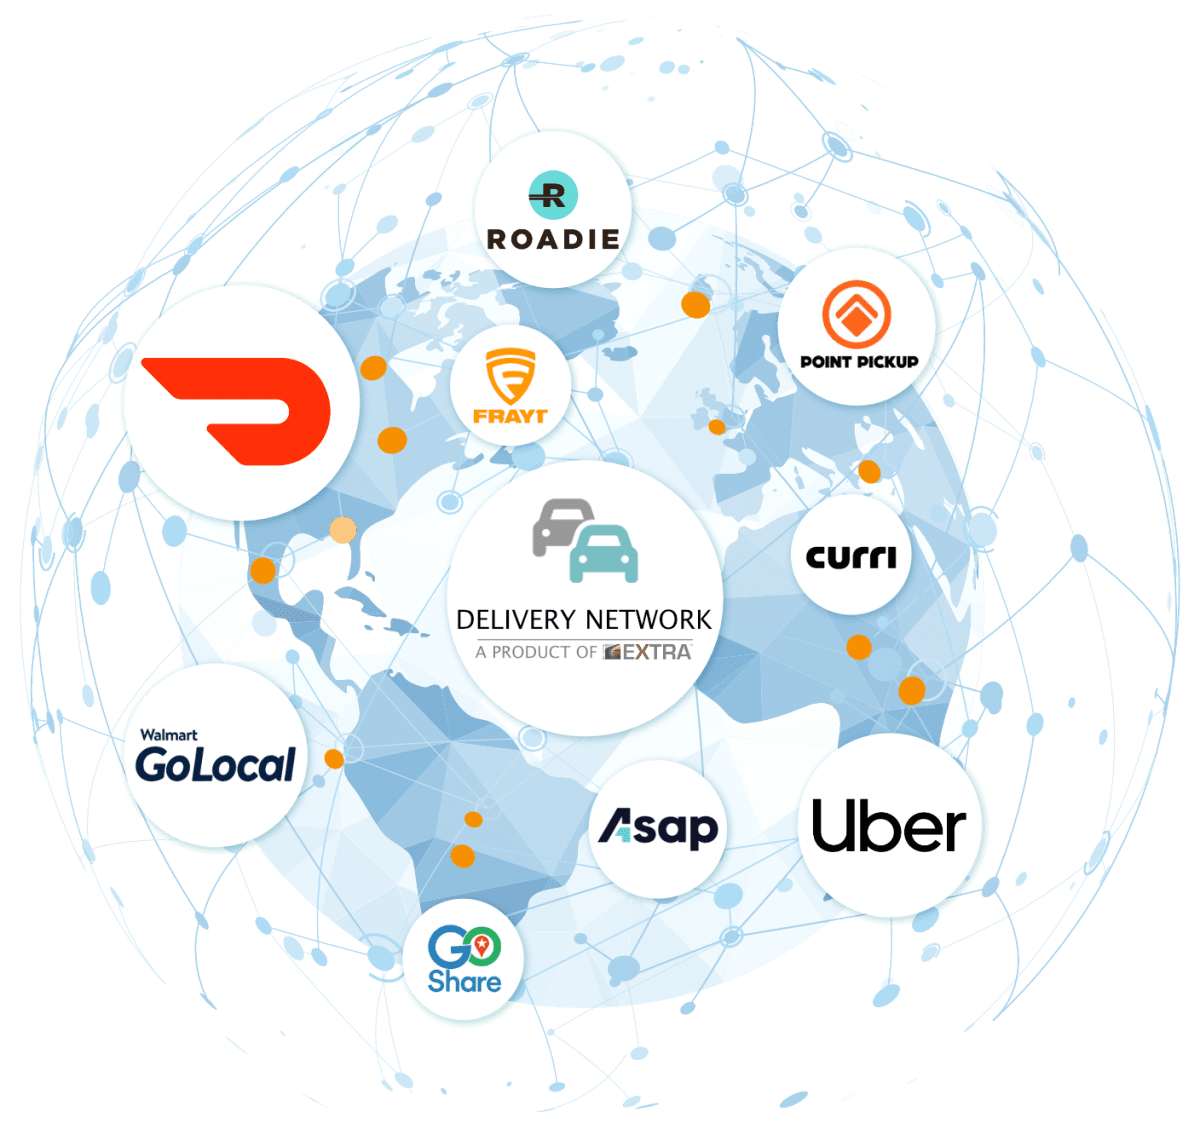 A globe network diagram showing the logos of the delivery providers on Elite EXTRA's Delivery Network